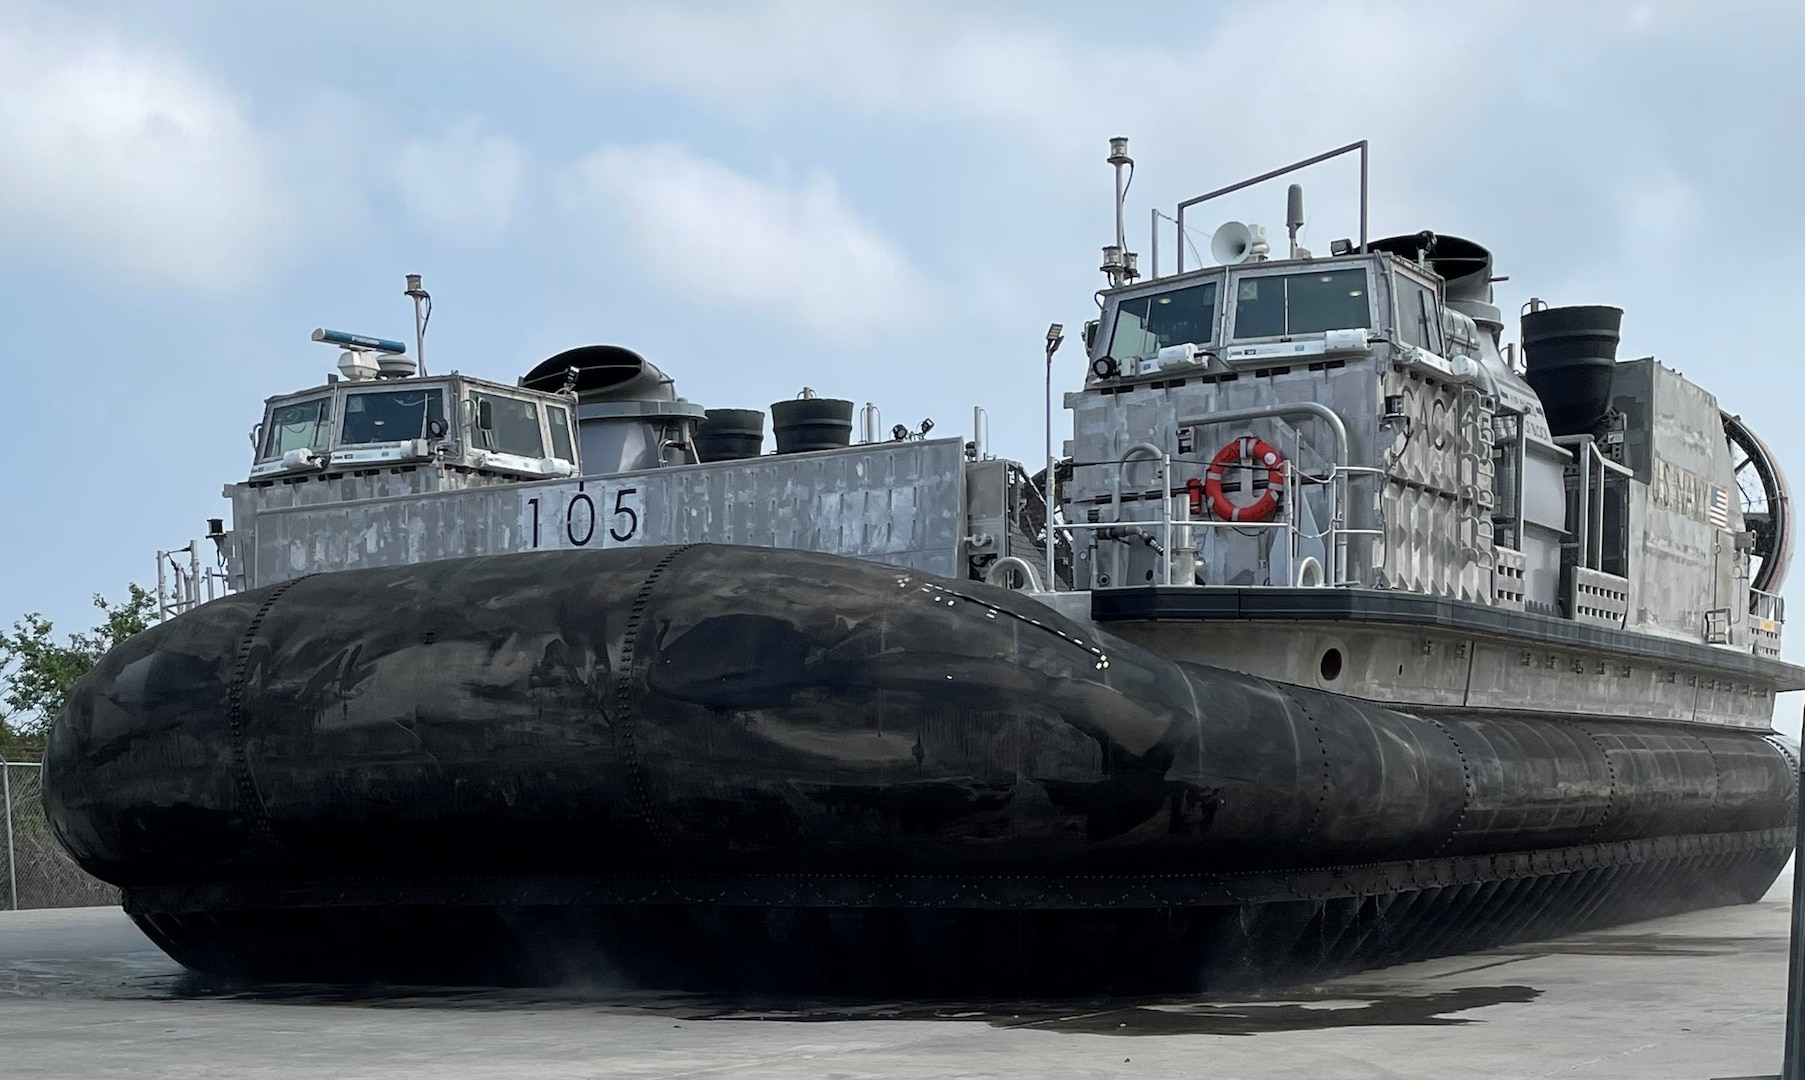 The Navy accepted delivery of the next-generation landing craft, Ship to Shore Connector (SSC), Landing Craft, Air Cushion (LCAC) 105, March 8.